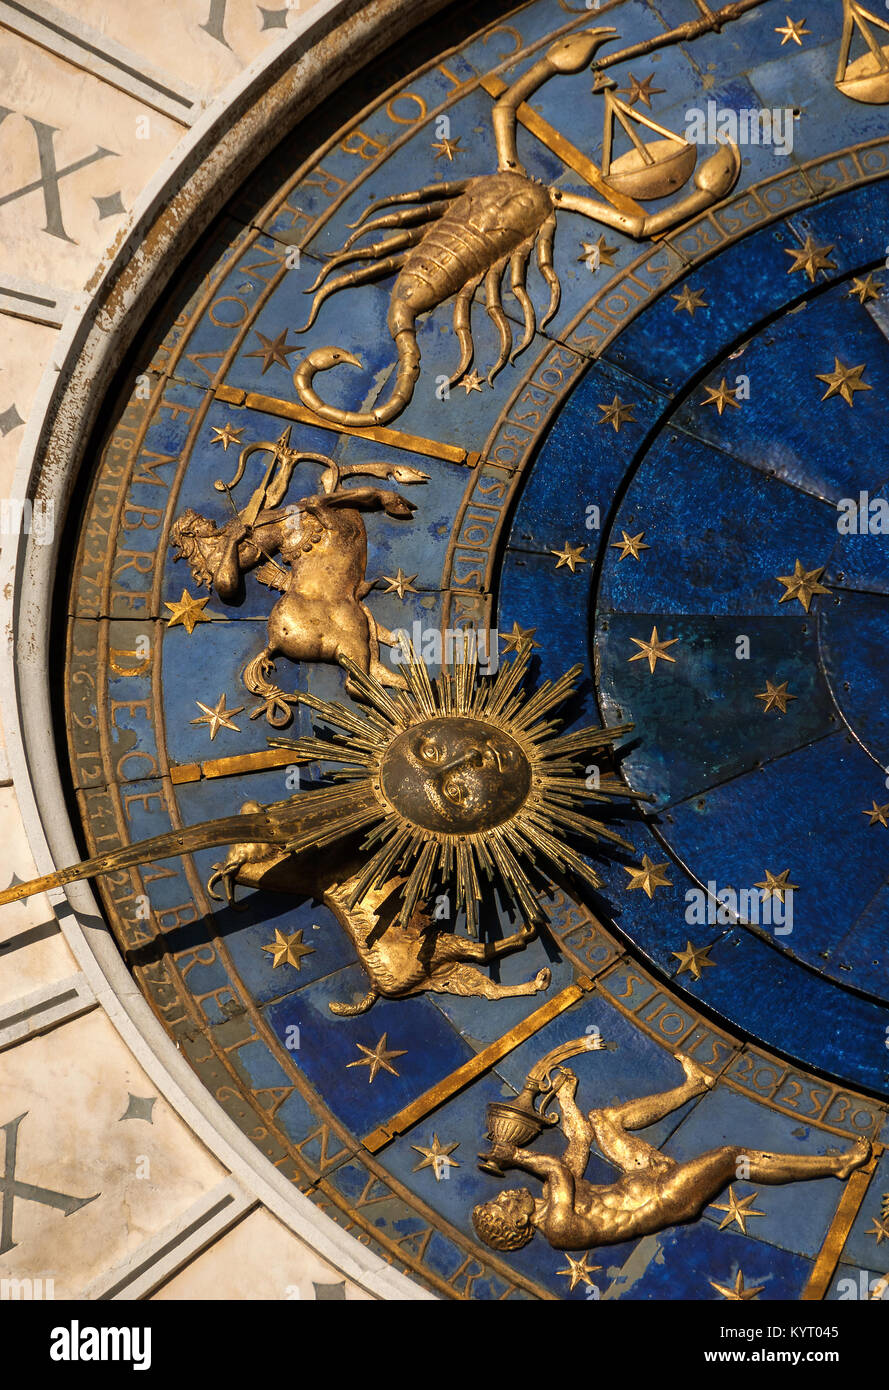 astrology in ancient times